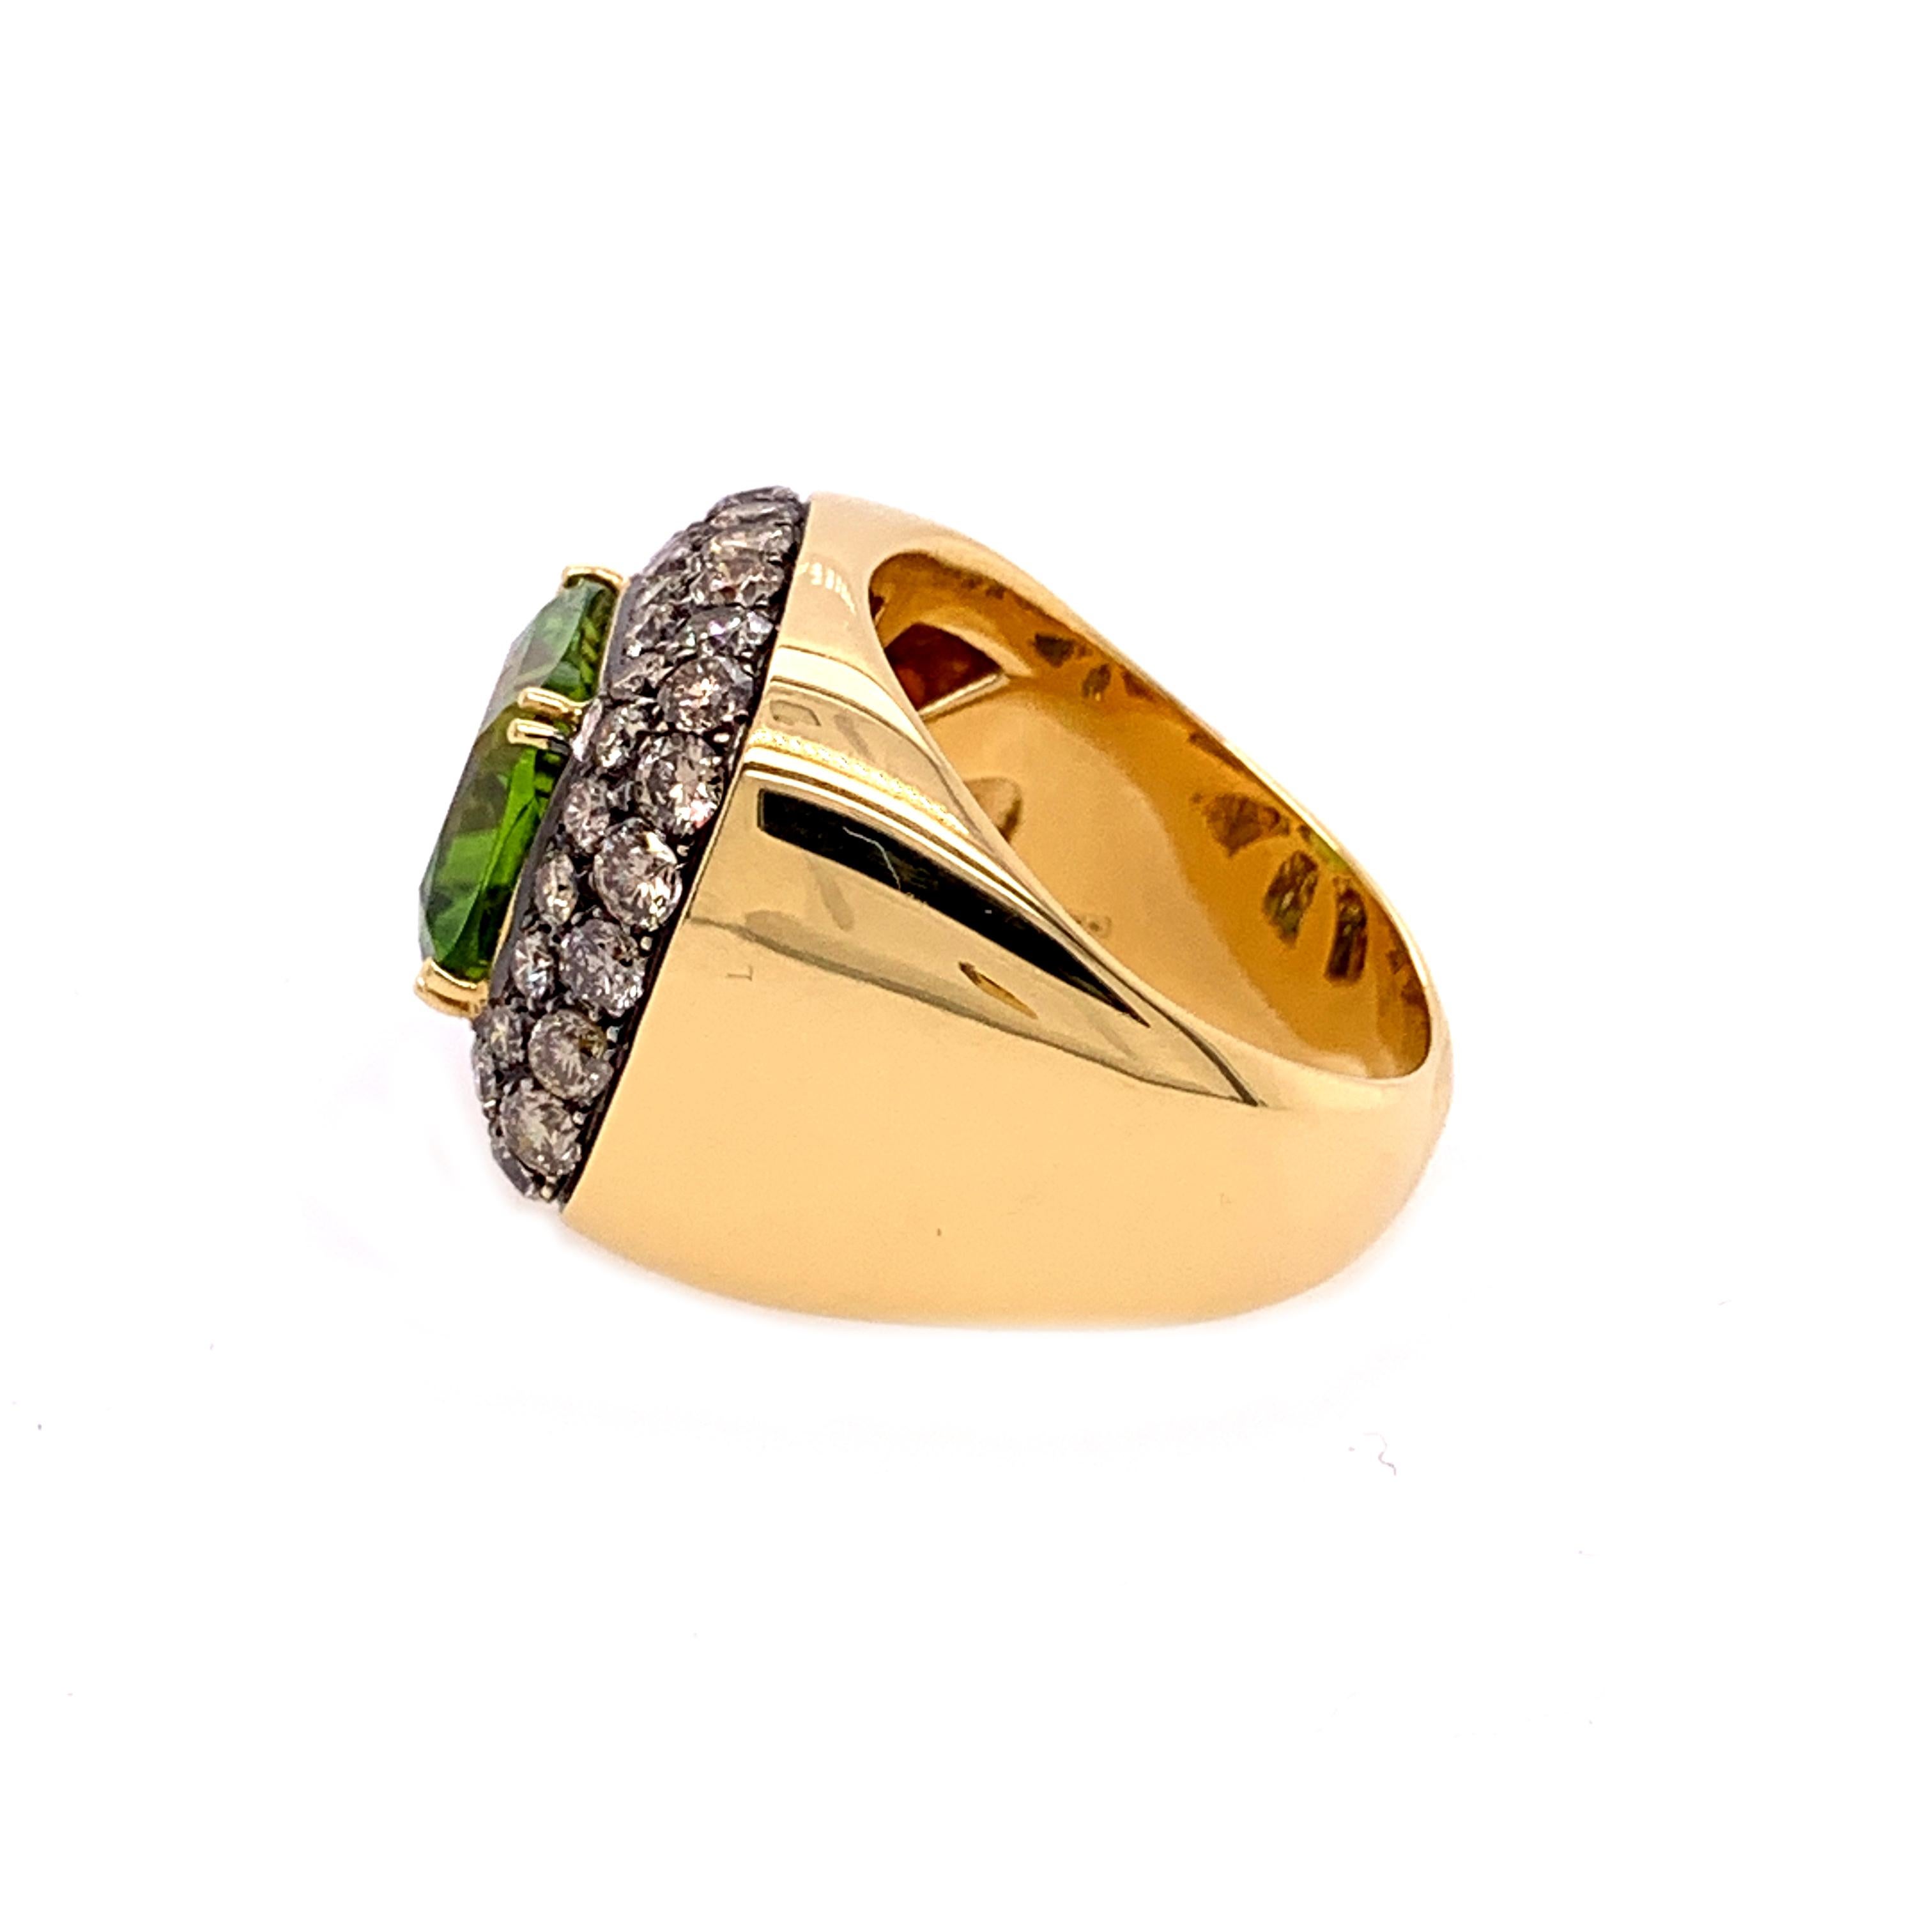 18 Karat Yellow Gold Brown Diamonds  and  Peridot Ring, finger size 54.5
18kt White gold   gr: 15.80
Brown Diamonds ct 0.54
A beautiful   square cut peridot of ct 10.40, surronded by a pillow of brown diamonds.
Matching earrings also available upon